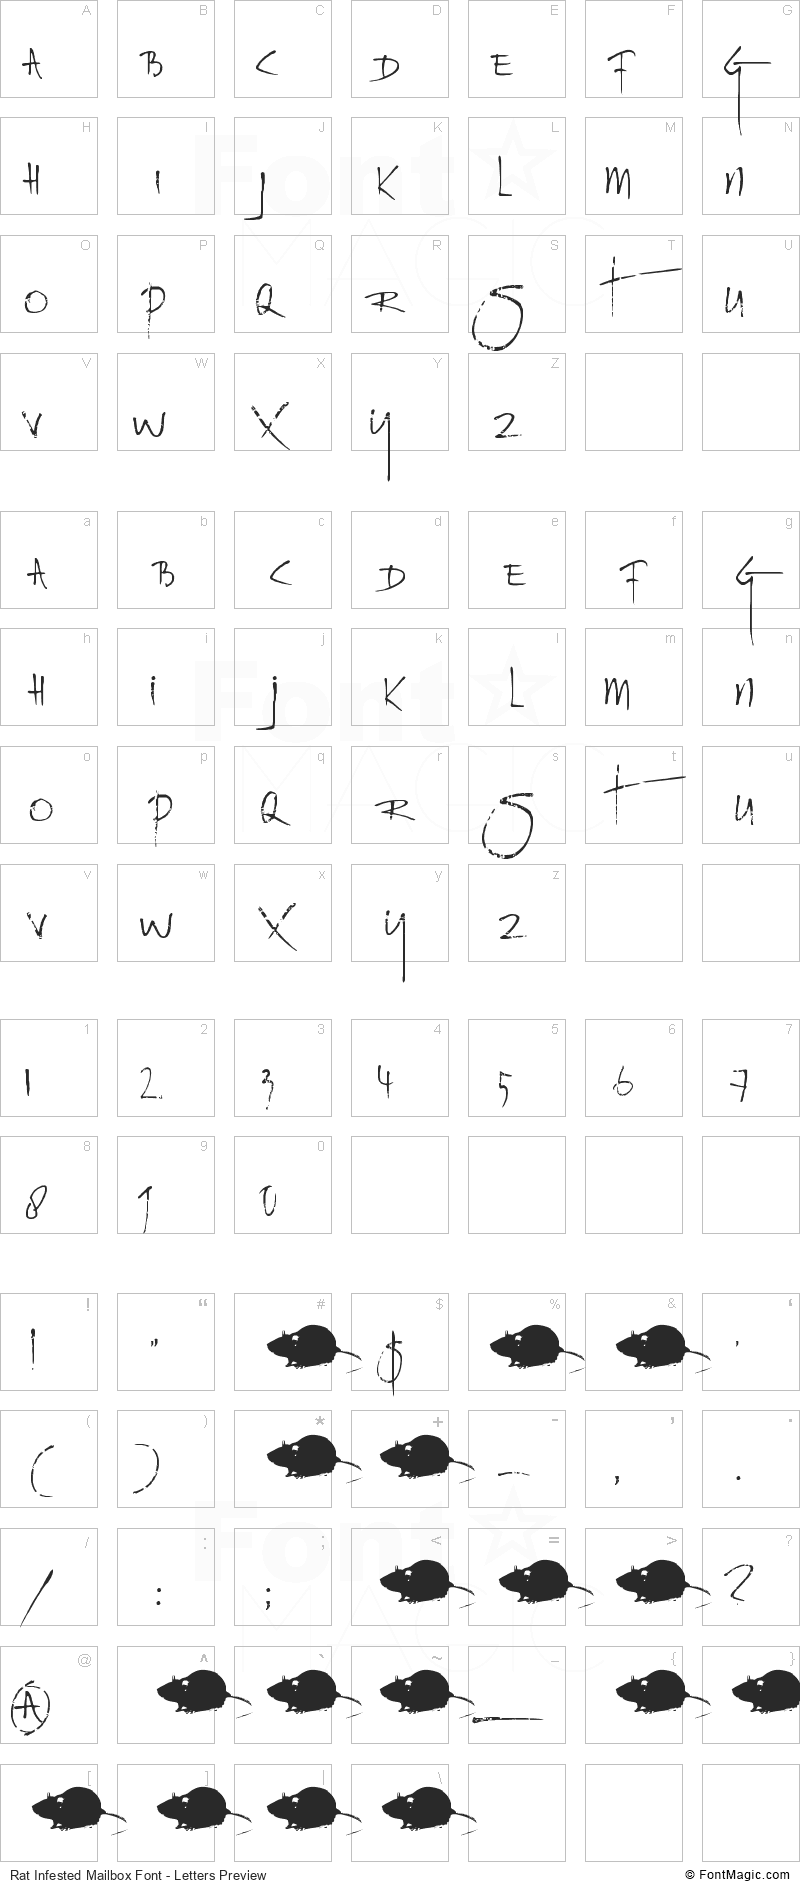 Rat Infested Mailbox Font - All Latters Preview Chart